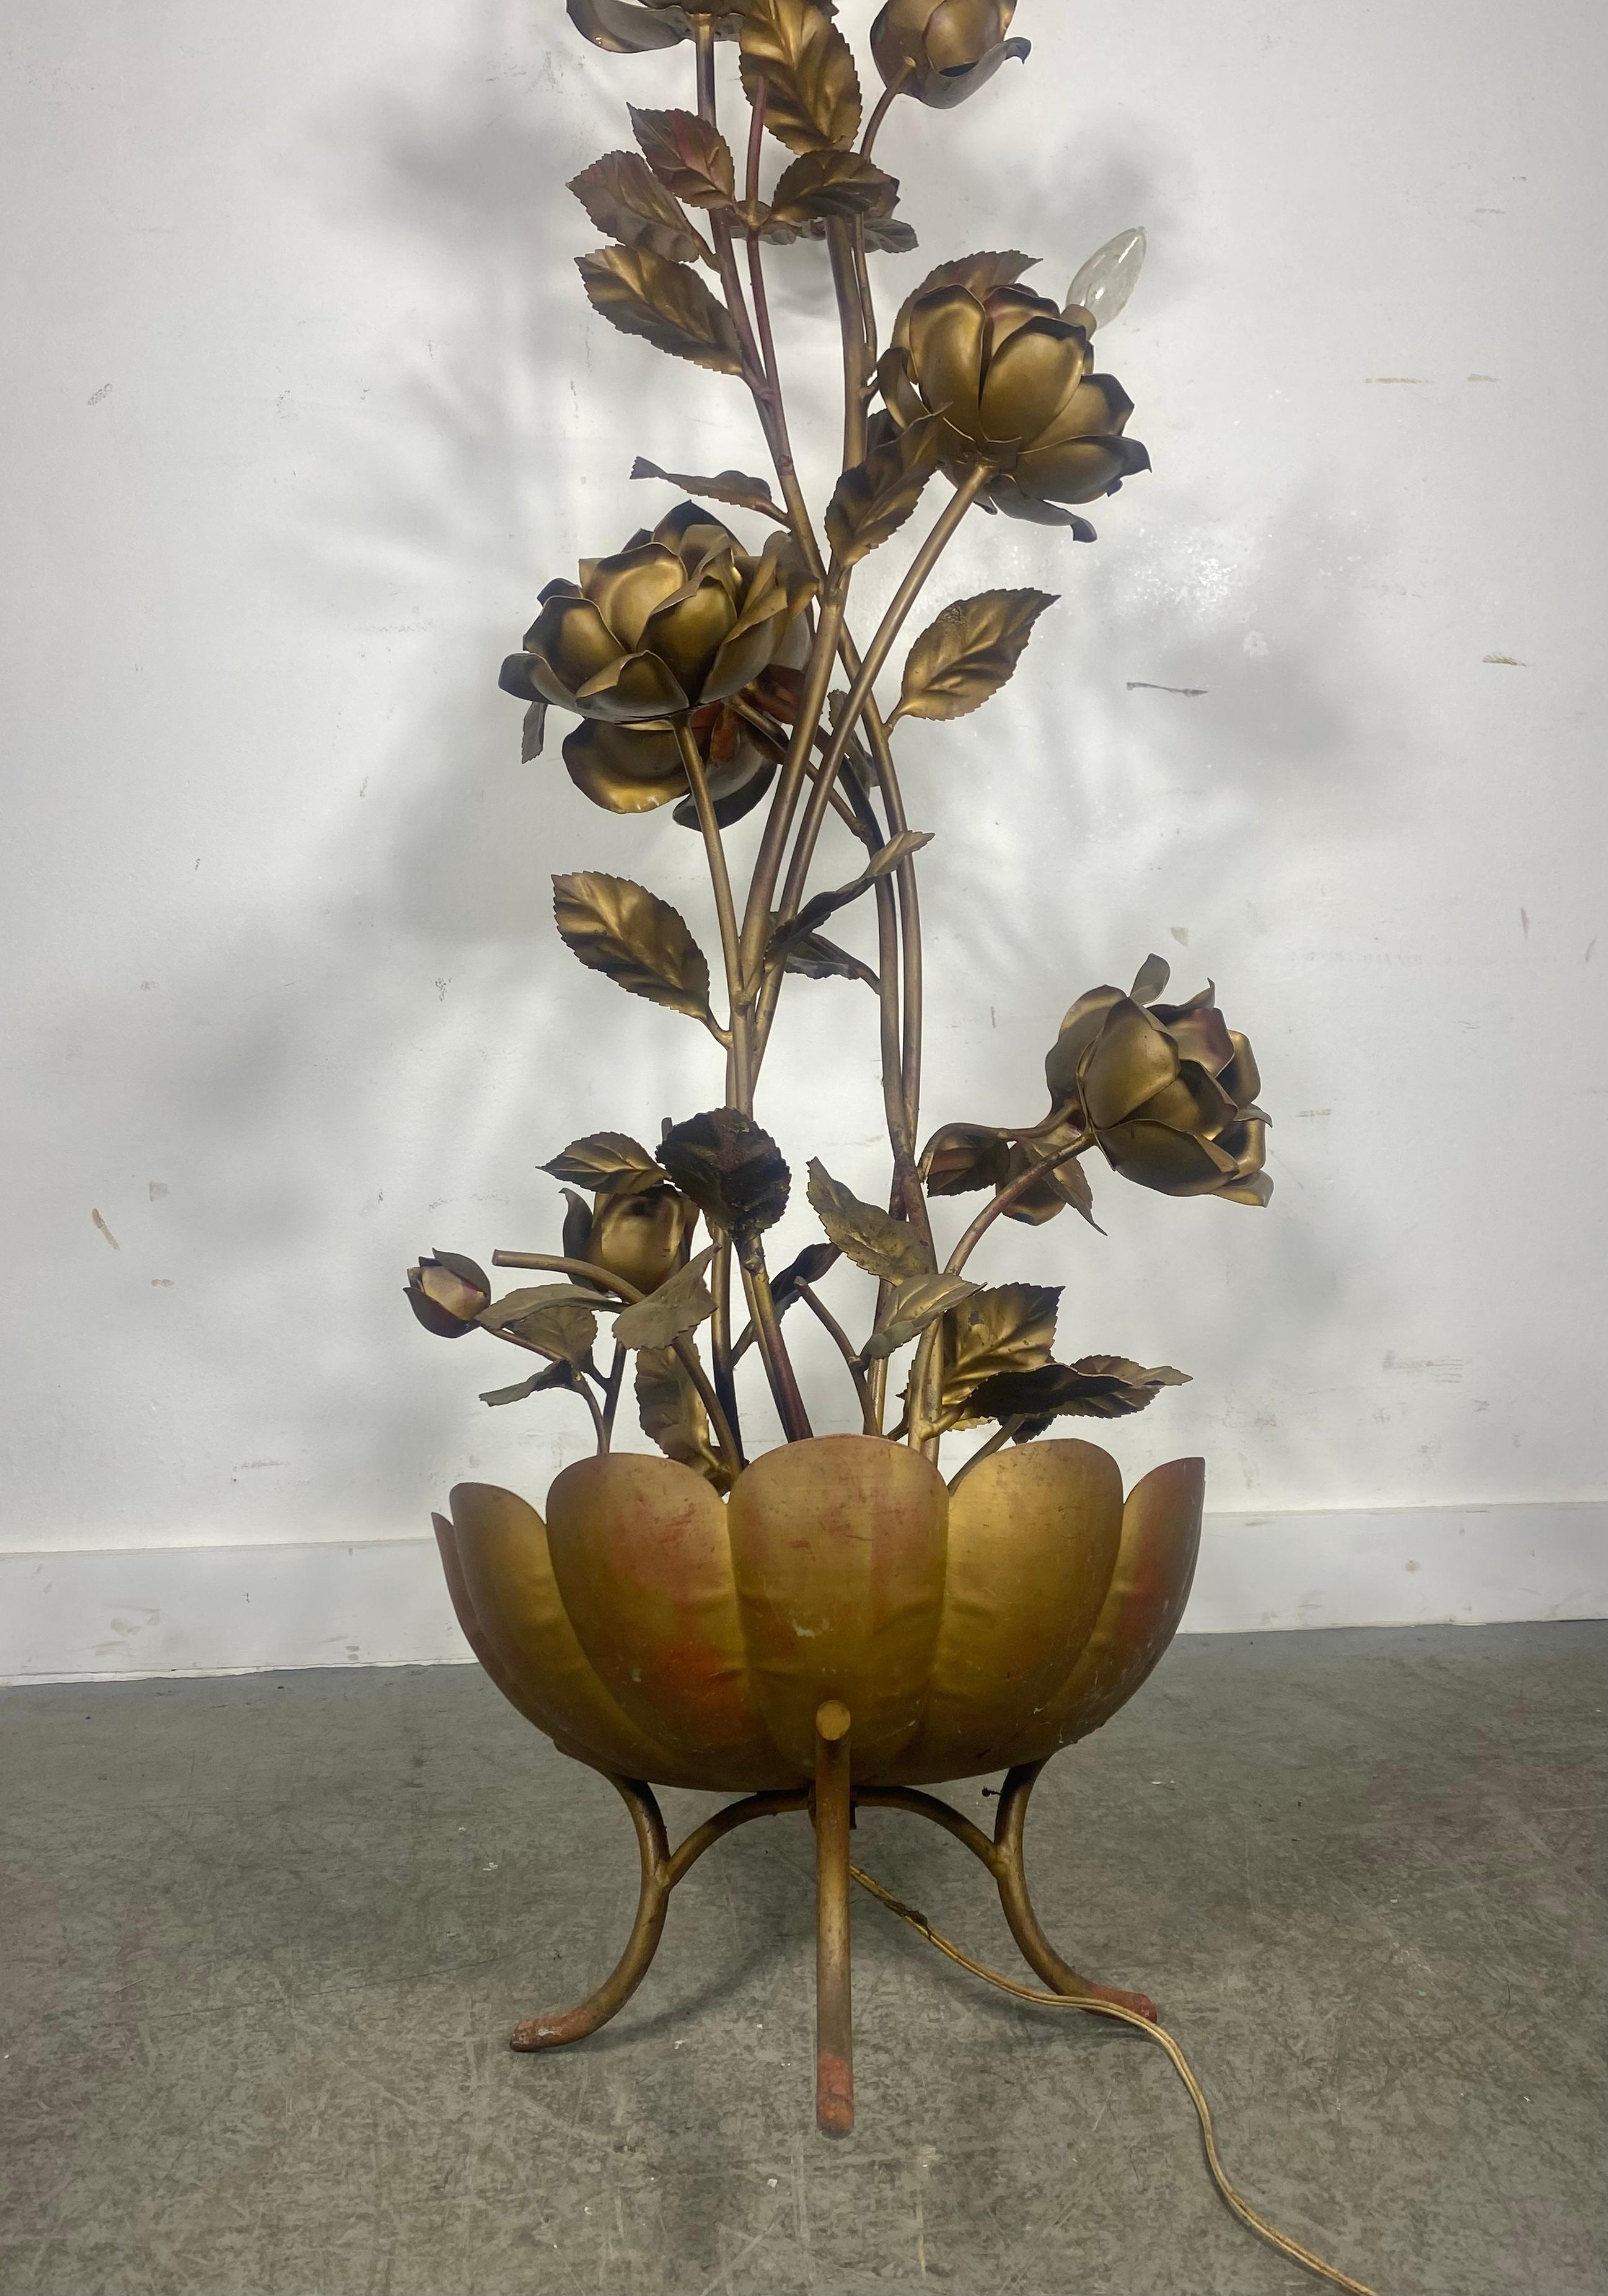 Gold Gilt Italian Regency Flower Floor Lamp / Sculpture by Banci Firenze In Good Condition For Sale In Buffalo, NY